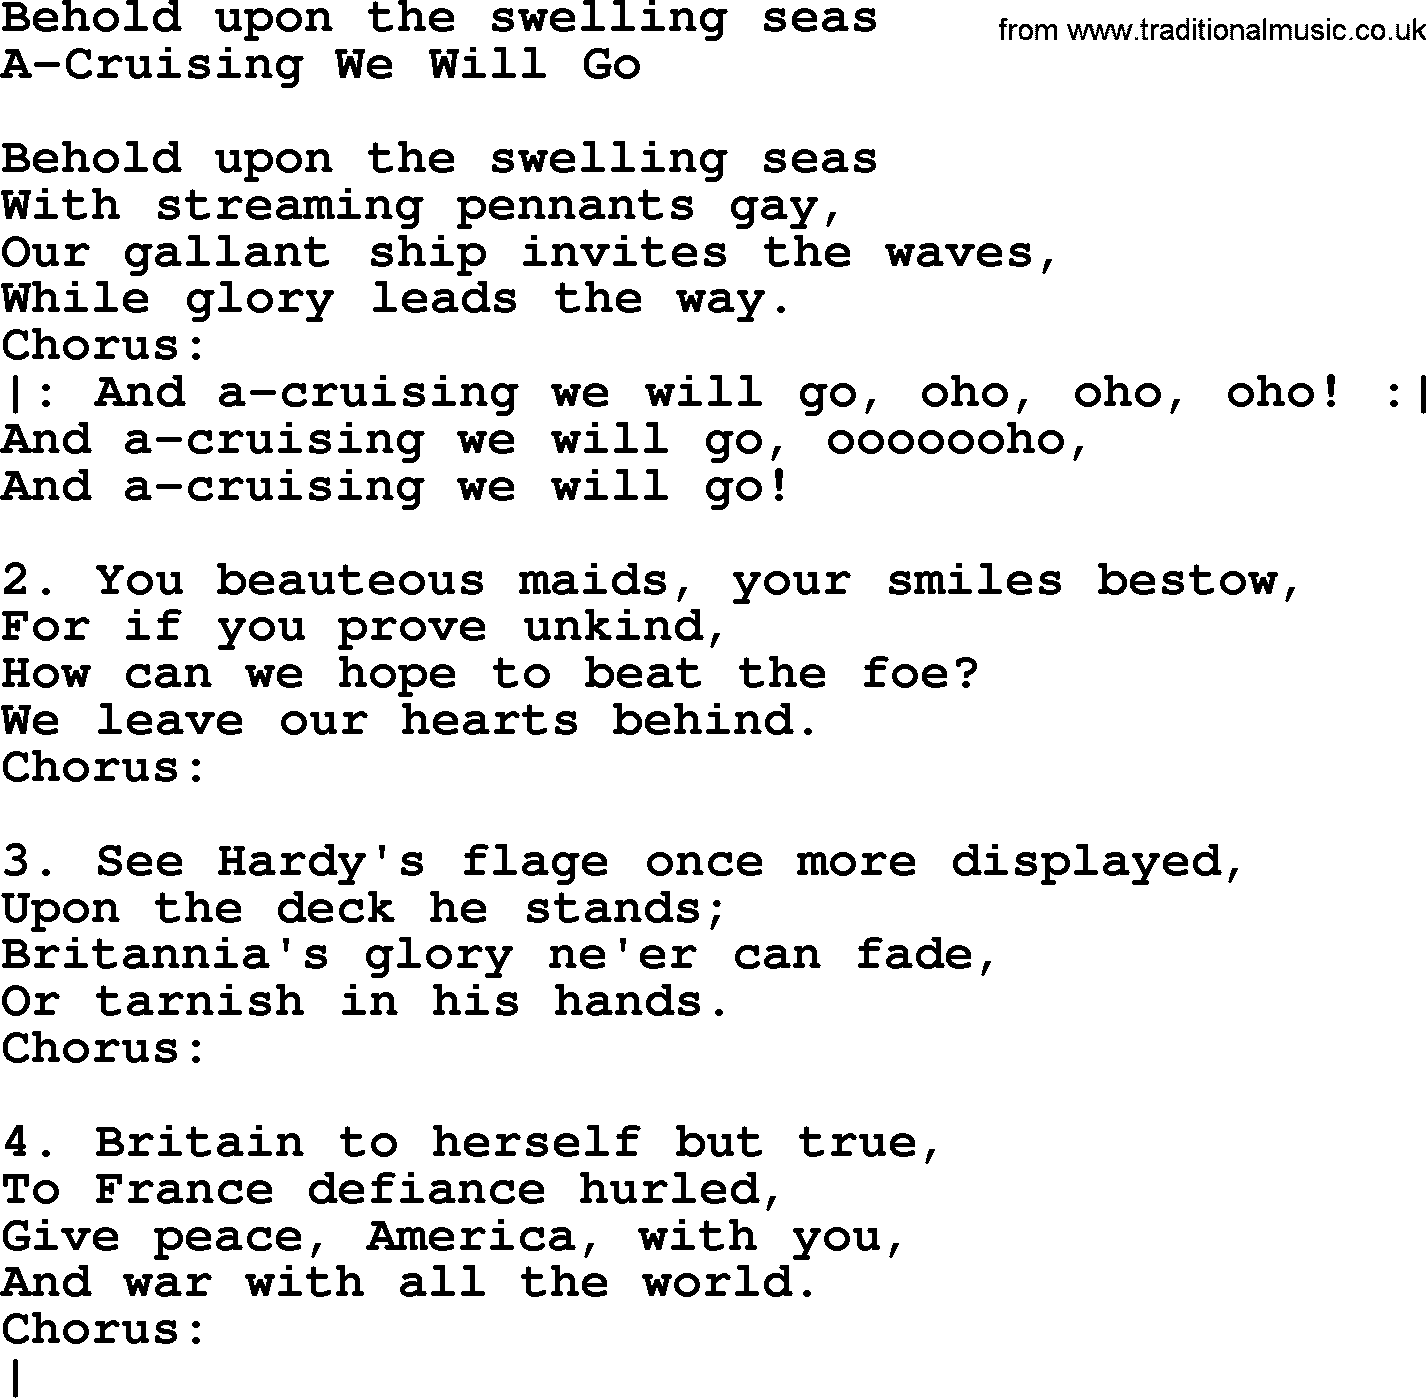 Sea Song or Shantie: Behold Upon The Swelling Seas, lyrics